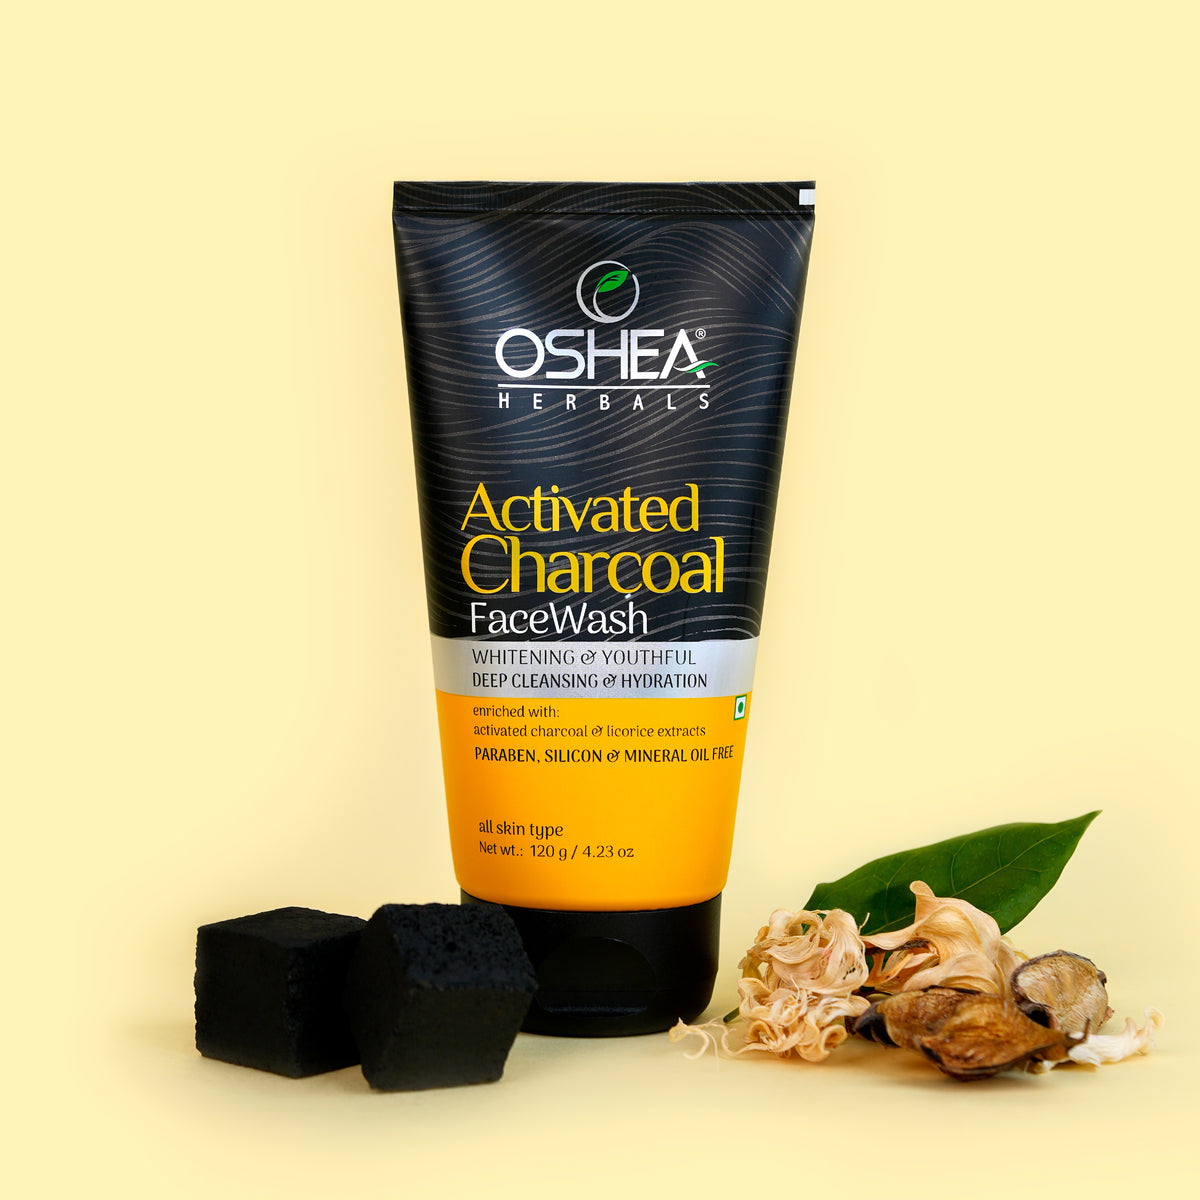  Activated Charcoal Face wash Oshea Herbals